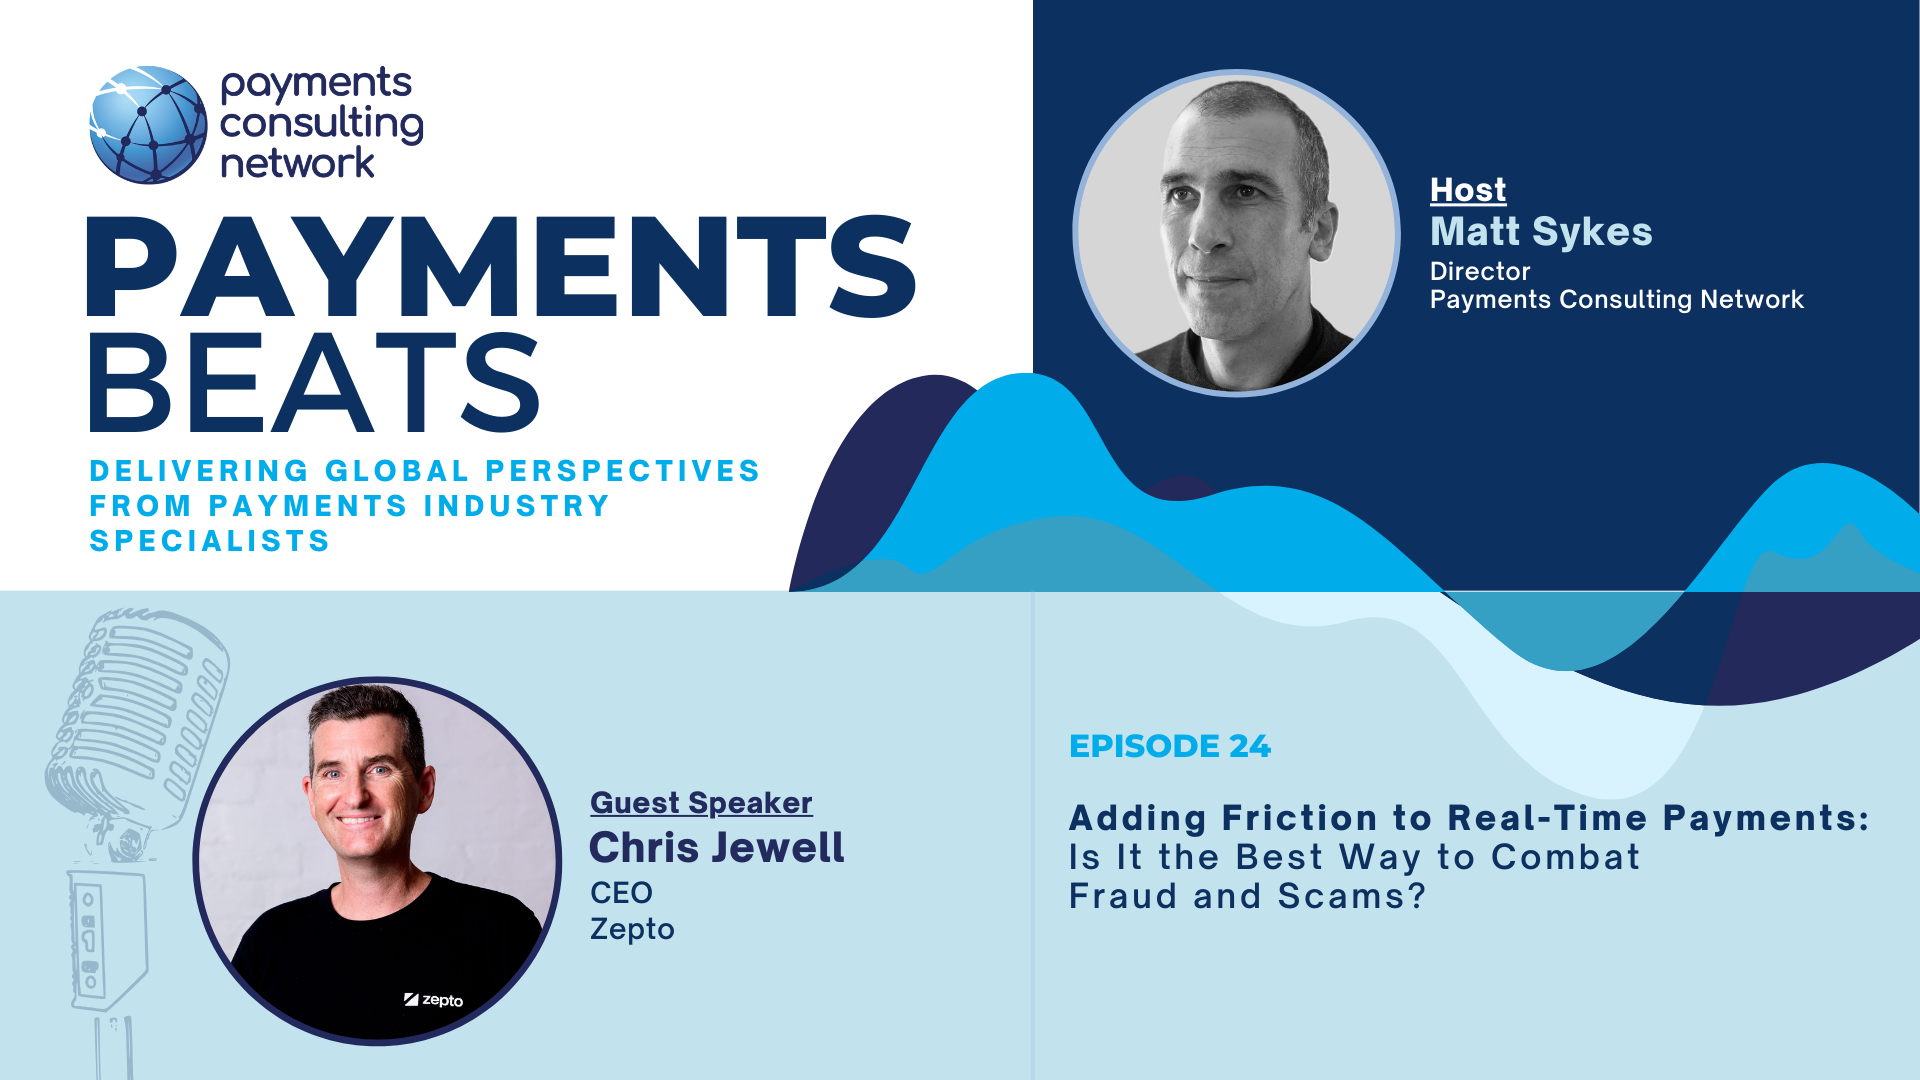 Episode 24 - Adding friction to real-time payments. Is it the best way to combat fraud and scams